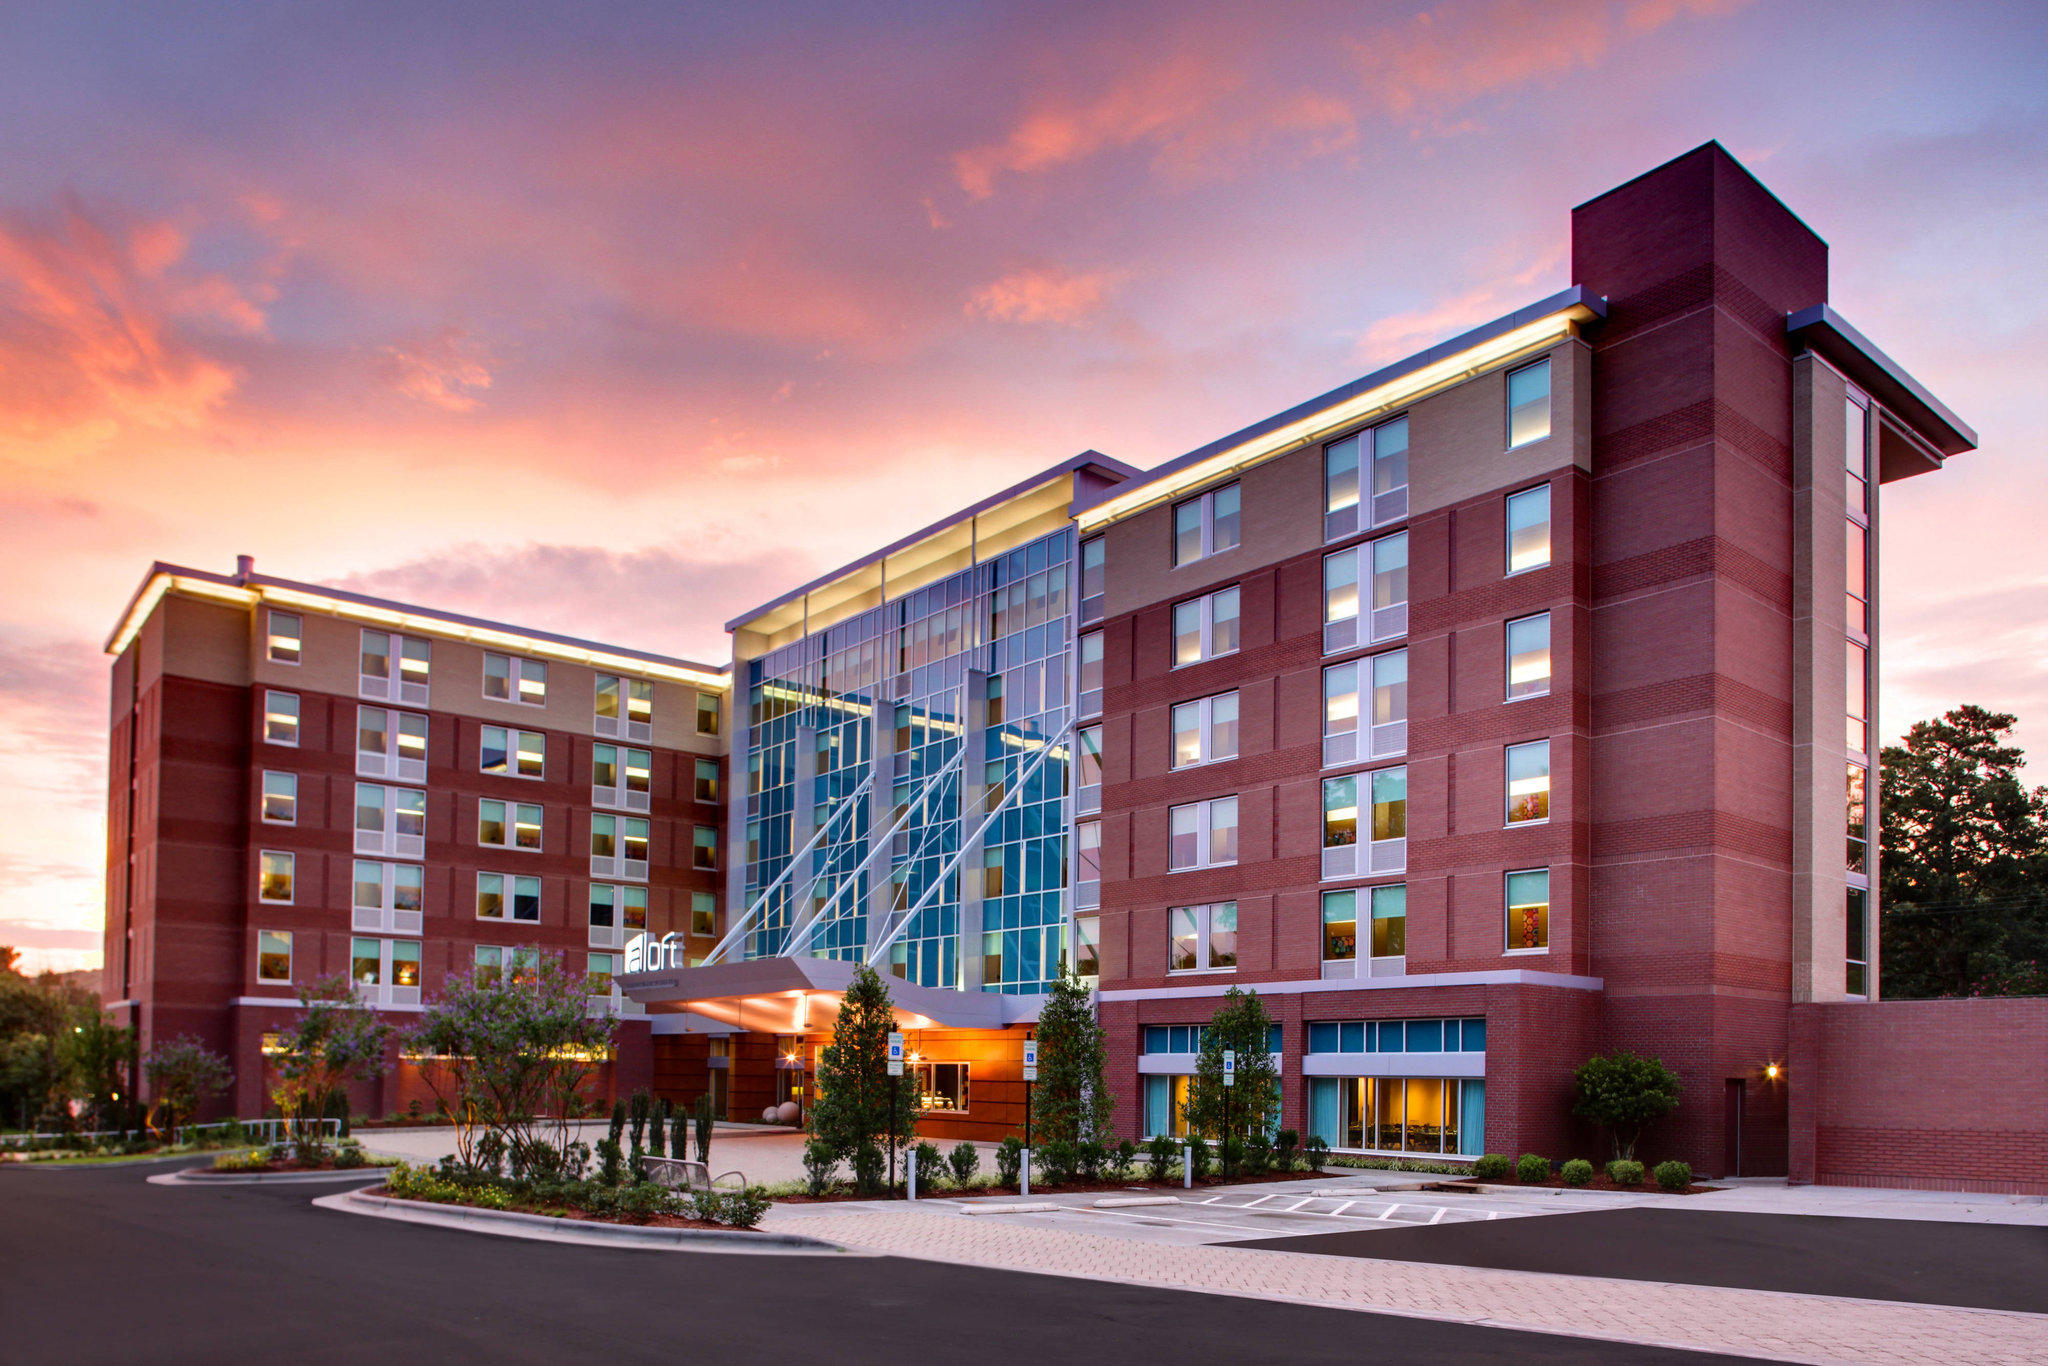 Aloft Chapel Hill Coupons near me in Chapel Hill, NC 27517 | 8coupons